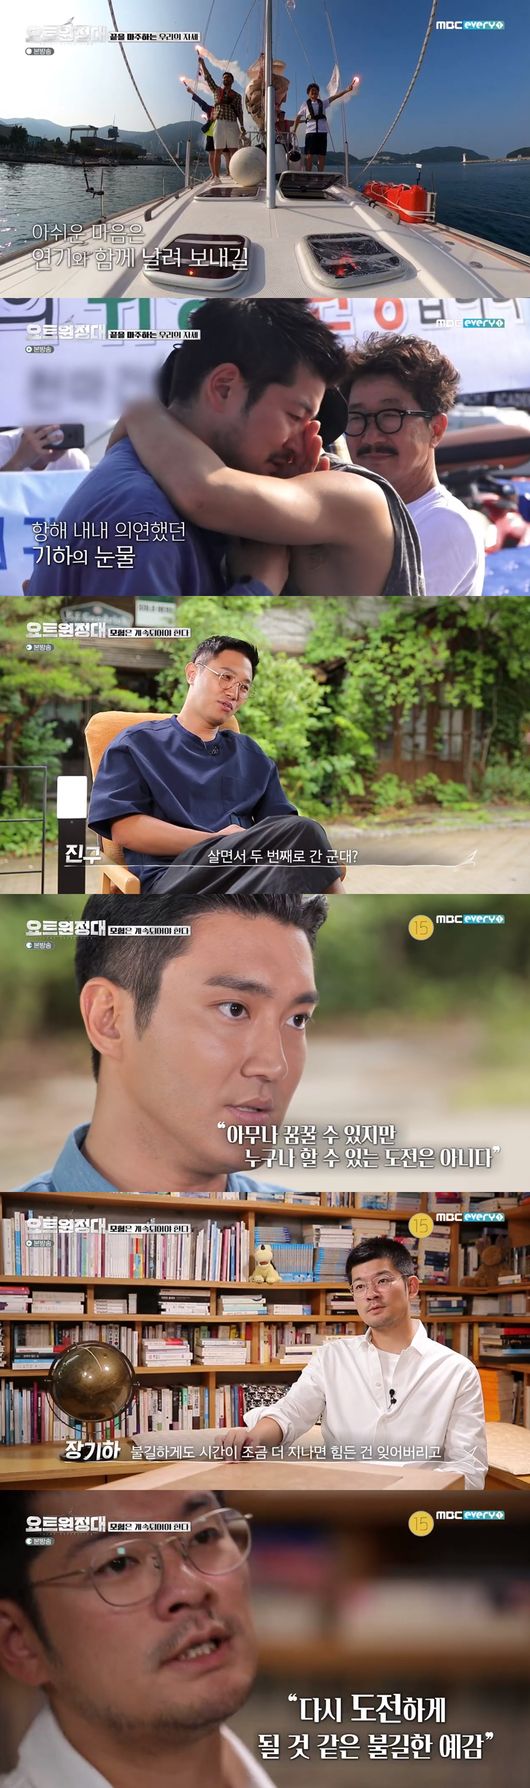 Jin Goo, Choi Siwon, Chang Kiha and Song Ho-joon finished their yacht trip and returned home.In MBC Everlon yacht Expedition broadcasted on the 19th, Jin Goo, Chang Kiha, Choi Siwon and Song Ho Joon spent the last night of the trip and bloomed the story.Earlier, Song Ho-joons birthday party was held on the same day. Captain Kim Seung-jin boiled seaweed soup for Song Ho-joons birthday and carefully prepared duck bulgogi.The crew sang a birthday party song for Song Ho-joon before the meal.Kim Seung-jin said, I made it with all the beef in it. The crew enjoyed the meal deliciously. When Choi Siwon turned it off, he suddenly got up.Choi Siwon went into the room and brought out a gift: Choi Siwon impressed by offering her a gift, saying, Its not a big deal, but happy birthday.Song Ho-joon said, The beef seaweed soup and duck bulgogi were the first celebrations. I had an unforgettable birthday.I think I have changed my mind how to live. The men were on the road to the next, and the men moved to the rubber boat to get inside the property, which they admired in the clear waters that were clear enough to see the floor.The crews gathered on the bonfire and sat together for the final night; Kim Seung-jin asked, How are the differences before and after the yacht trip?The first day was really sick, its still memorable - it was really hard, Choi Siwon said.Chang Kiha said: I am so sorry to the captain, but frankly, I do not have Feelings who have become close to yacht. I still do not know how to operate yacht.I thought I was the only one. Chang Kiha said, I reaffirmed that I am a very short person.I thought that this shortage could be lived without difficulty if I lived with others. On the other hand, I am fortunate.Jin Goo said, I think everyone can ride, but I can not ride anyone.Song Ho-joon said, The key to this trip is that we were worried about each other and relied on each other. Kim Seung-jin said, The first and the end of the voyage are the most important.We will sail tomorrow, but lets make it safe. Meanwhile, the expedition crew returned to Geoje Island safely. Chang Kiha showed tears as the ship docked.Its the second Army-like Feelings to live, Jin Goo said in an interview with the production team. For a man, Army does not want to go back, but its a place to go once.Anyone can dream, but not everyone can, Choi Siwon said.Chang Kiha said, I think I will forget all the hard things after a while, and I am caught up in the ominous sense that I will challenge again after time.: MBC Everlon yacht Expedition broadcast capture